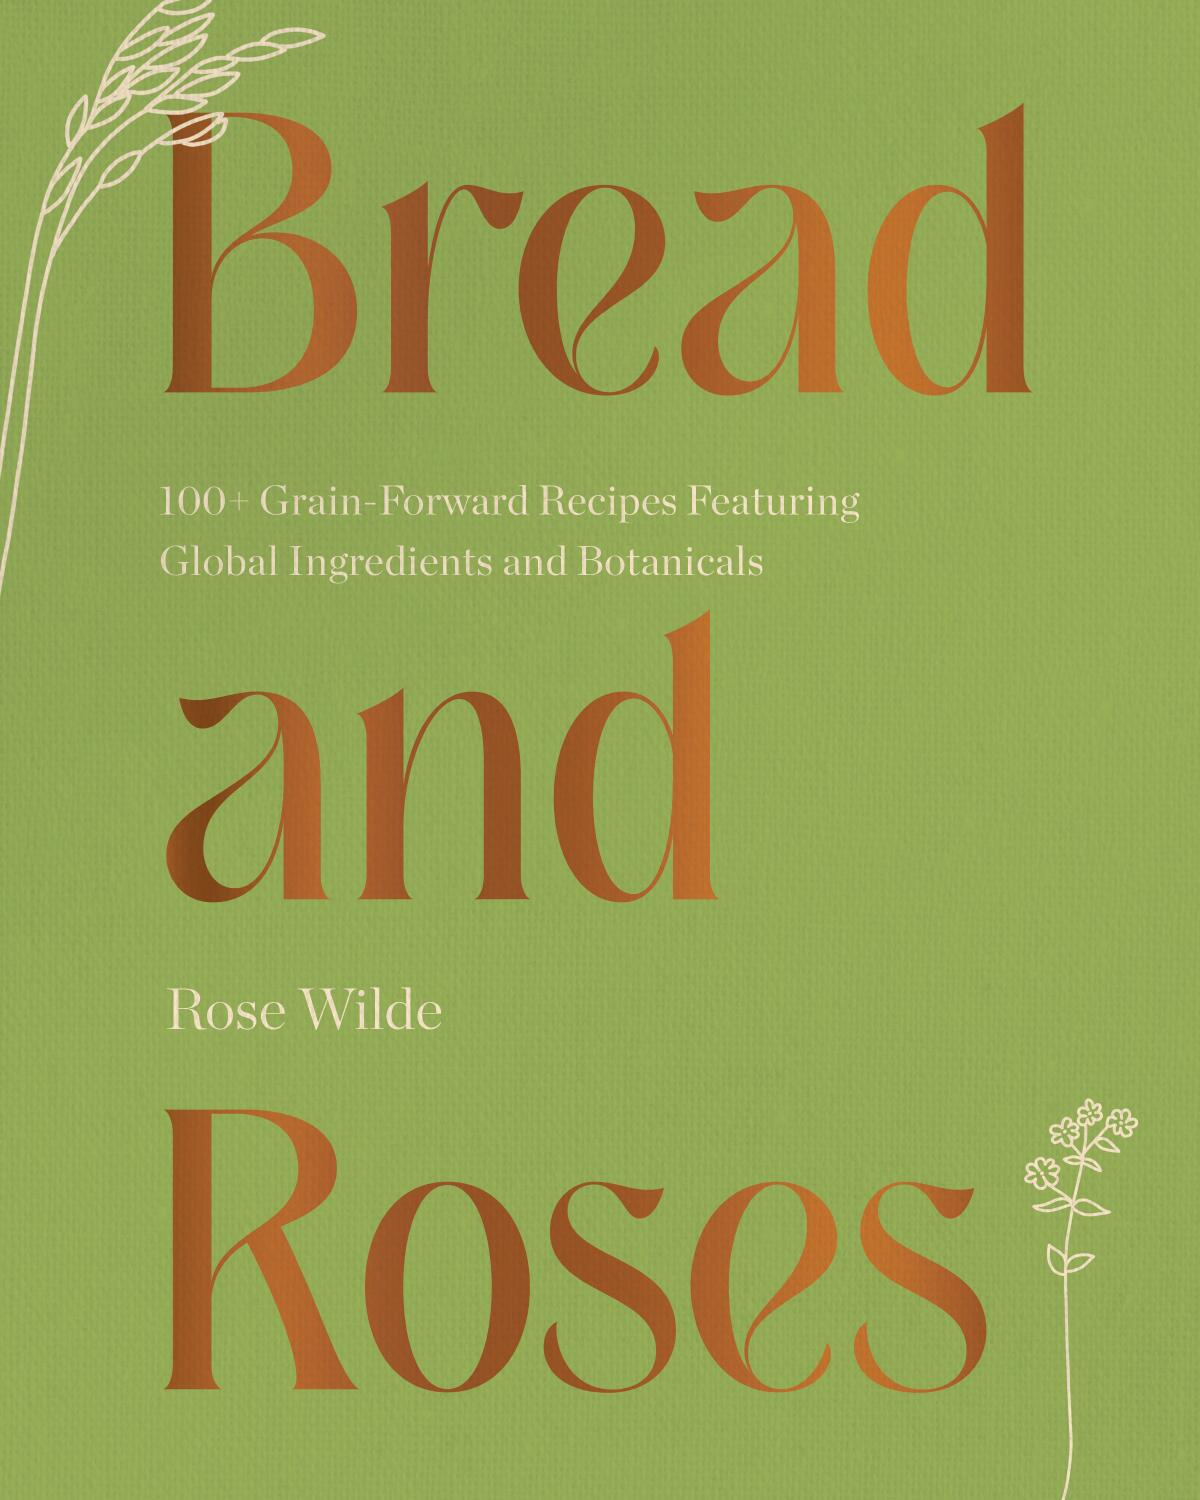 The book cover of "Bread and Roses" by Rose Wild.